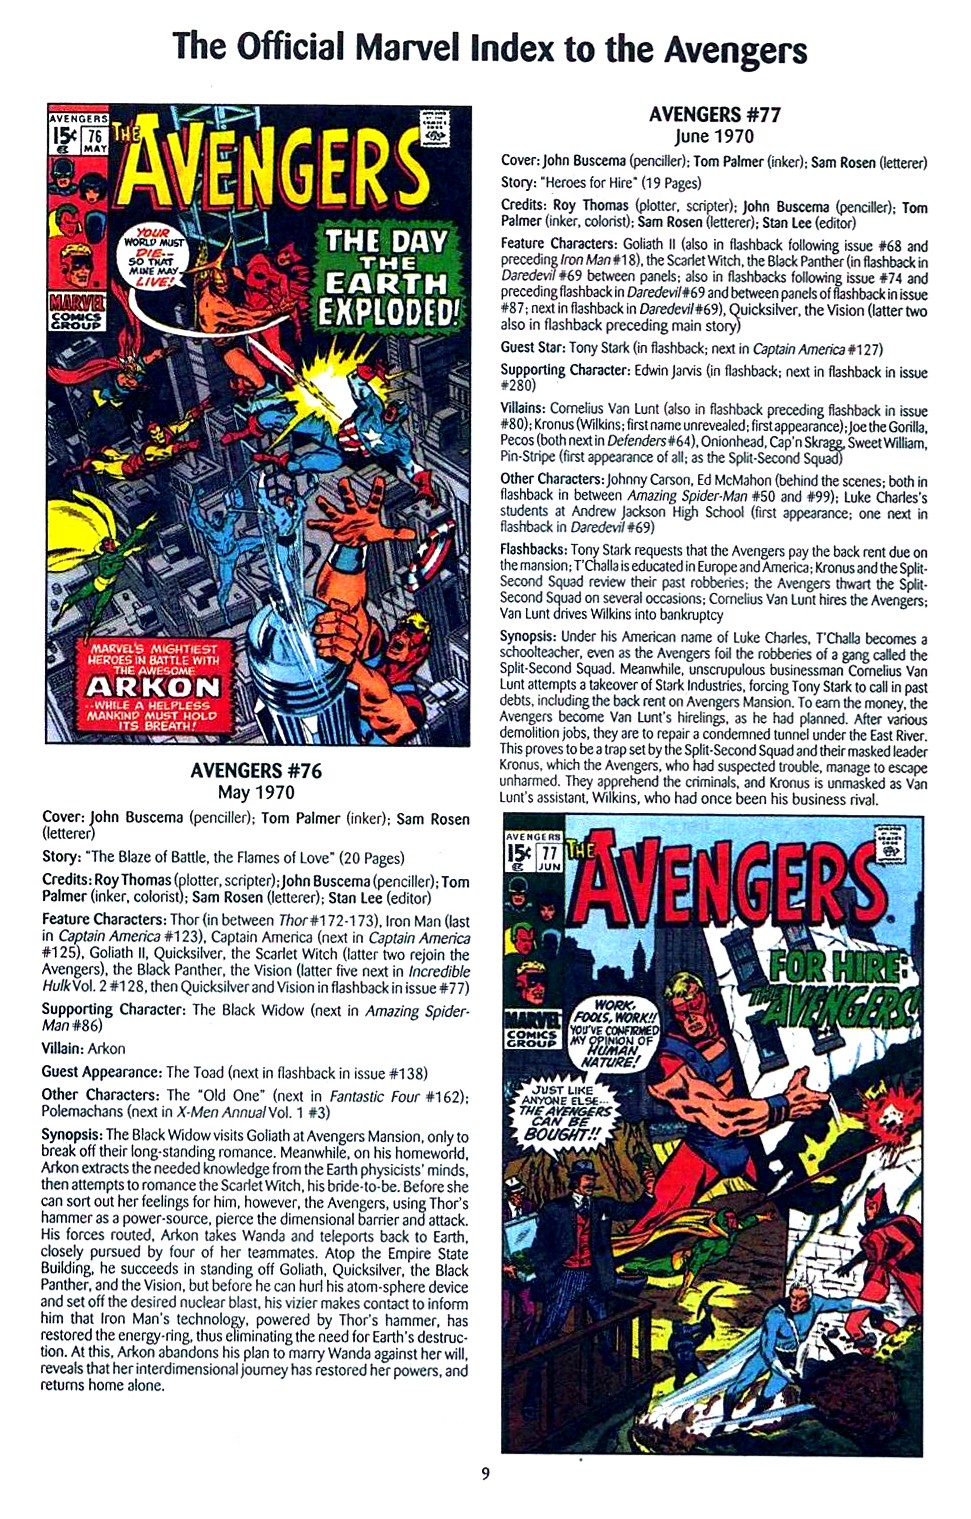 Read online The Official Marvel Index to the Avengers comic -  Issue #2 - 11